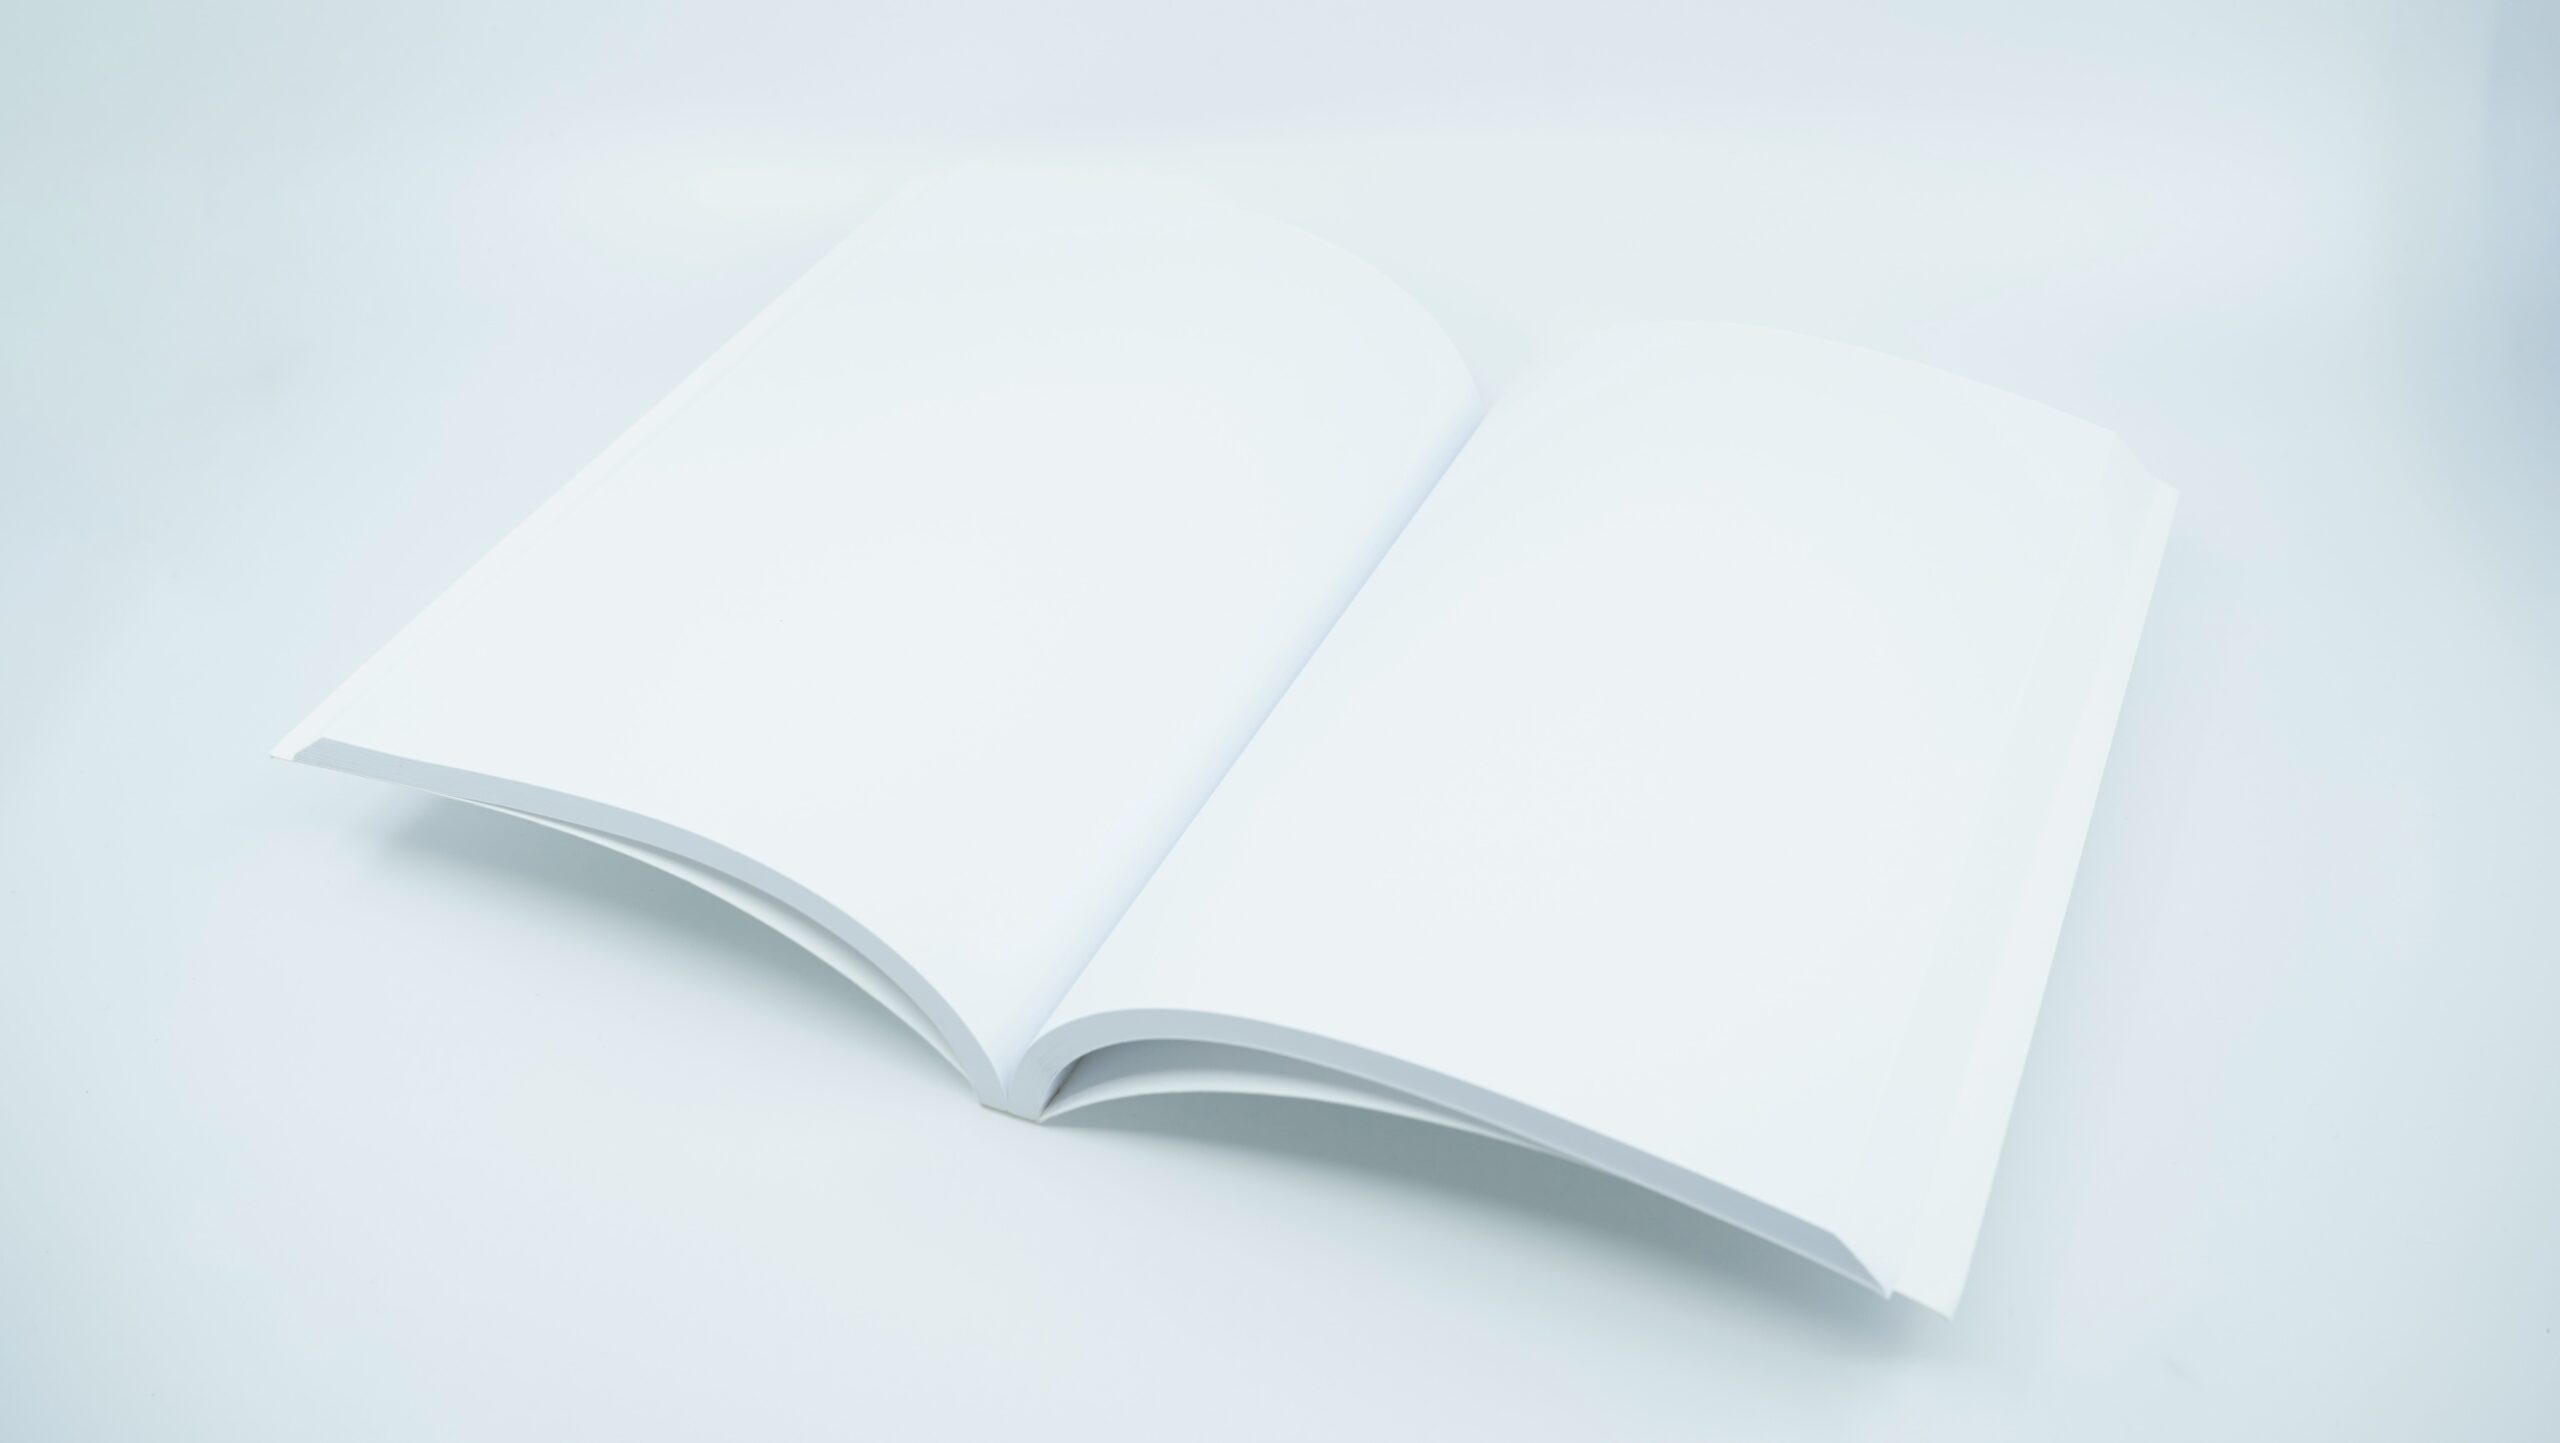 Open book with blank pages against a white background.